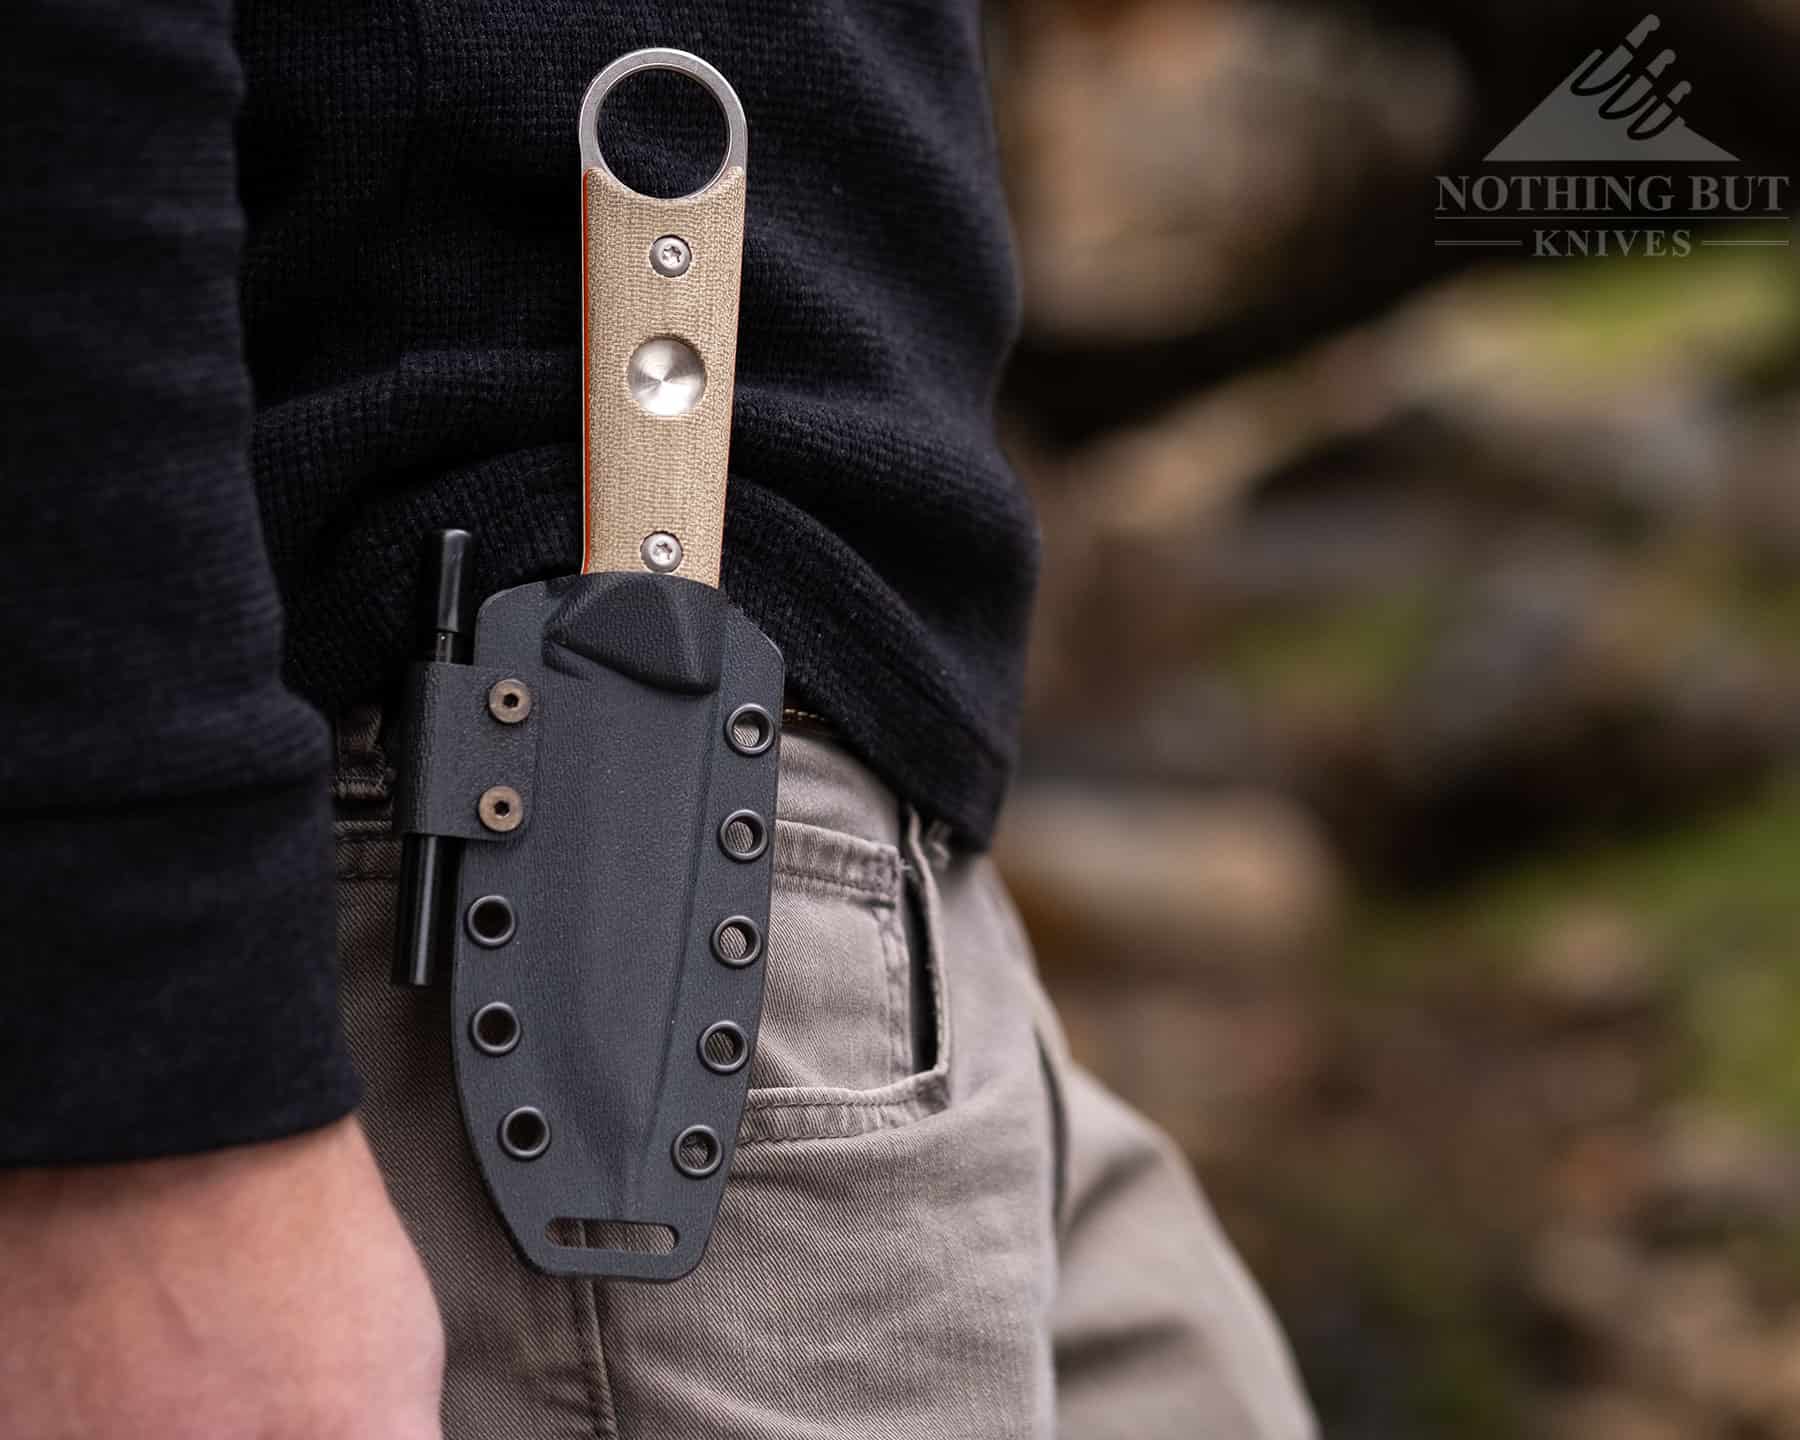 The Firecraft Puukko sheath is an ambidextrous sheath with several carry options. 